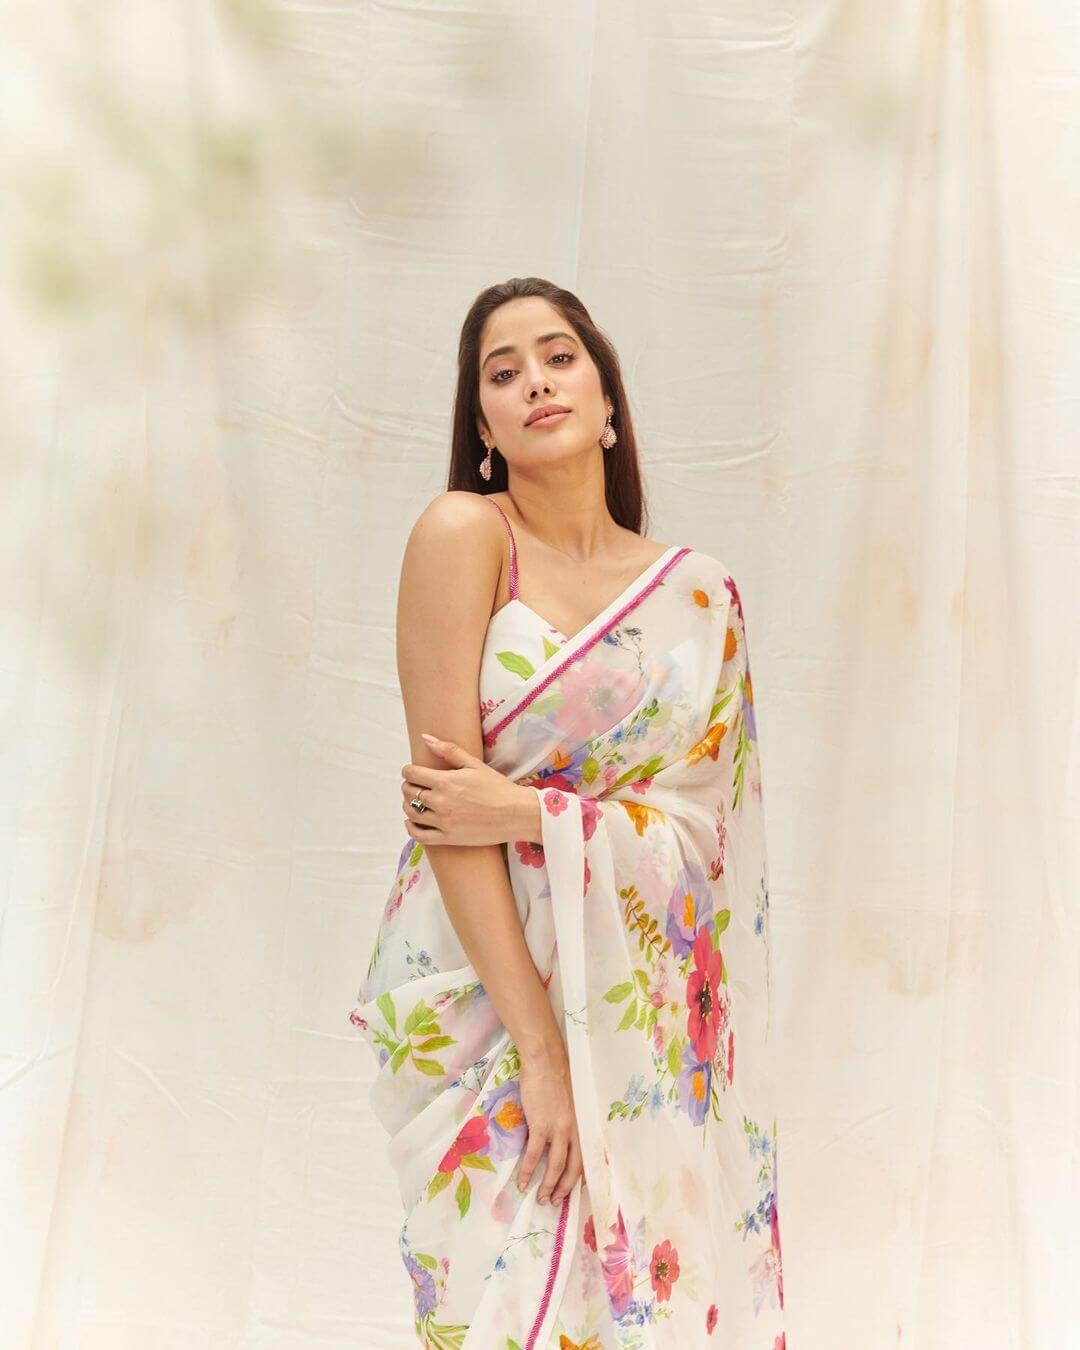 Janhvi Kapoor's Spring-Inspired Look in a White Saree